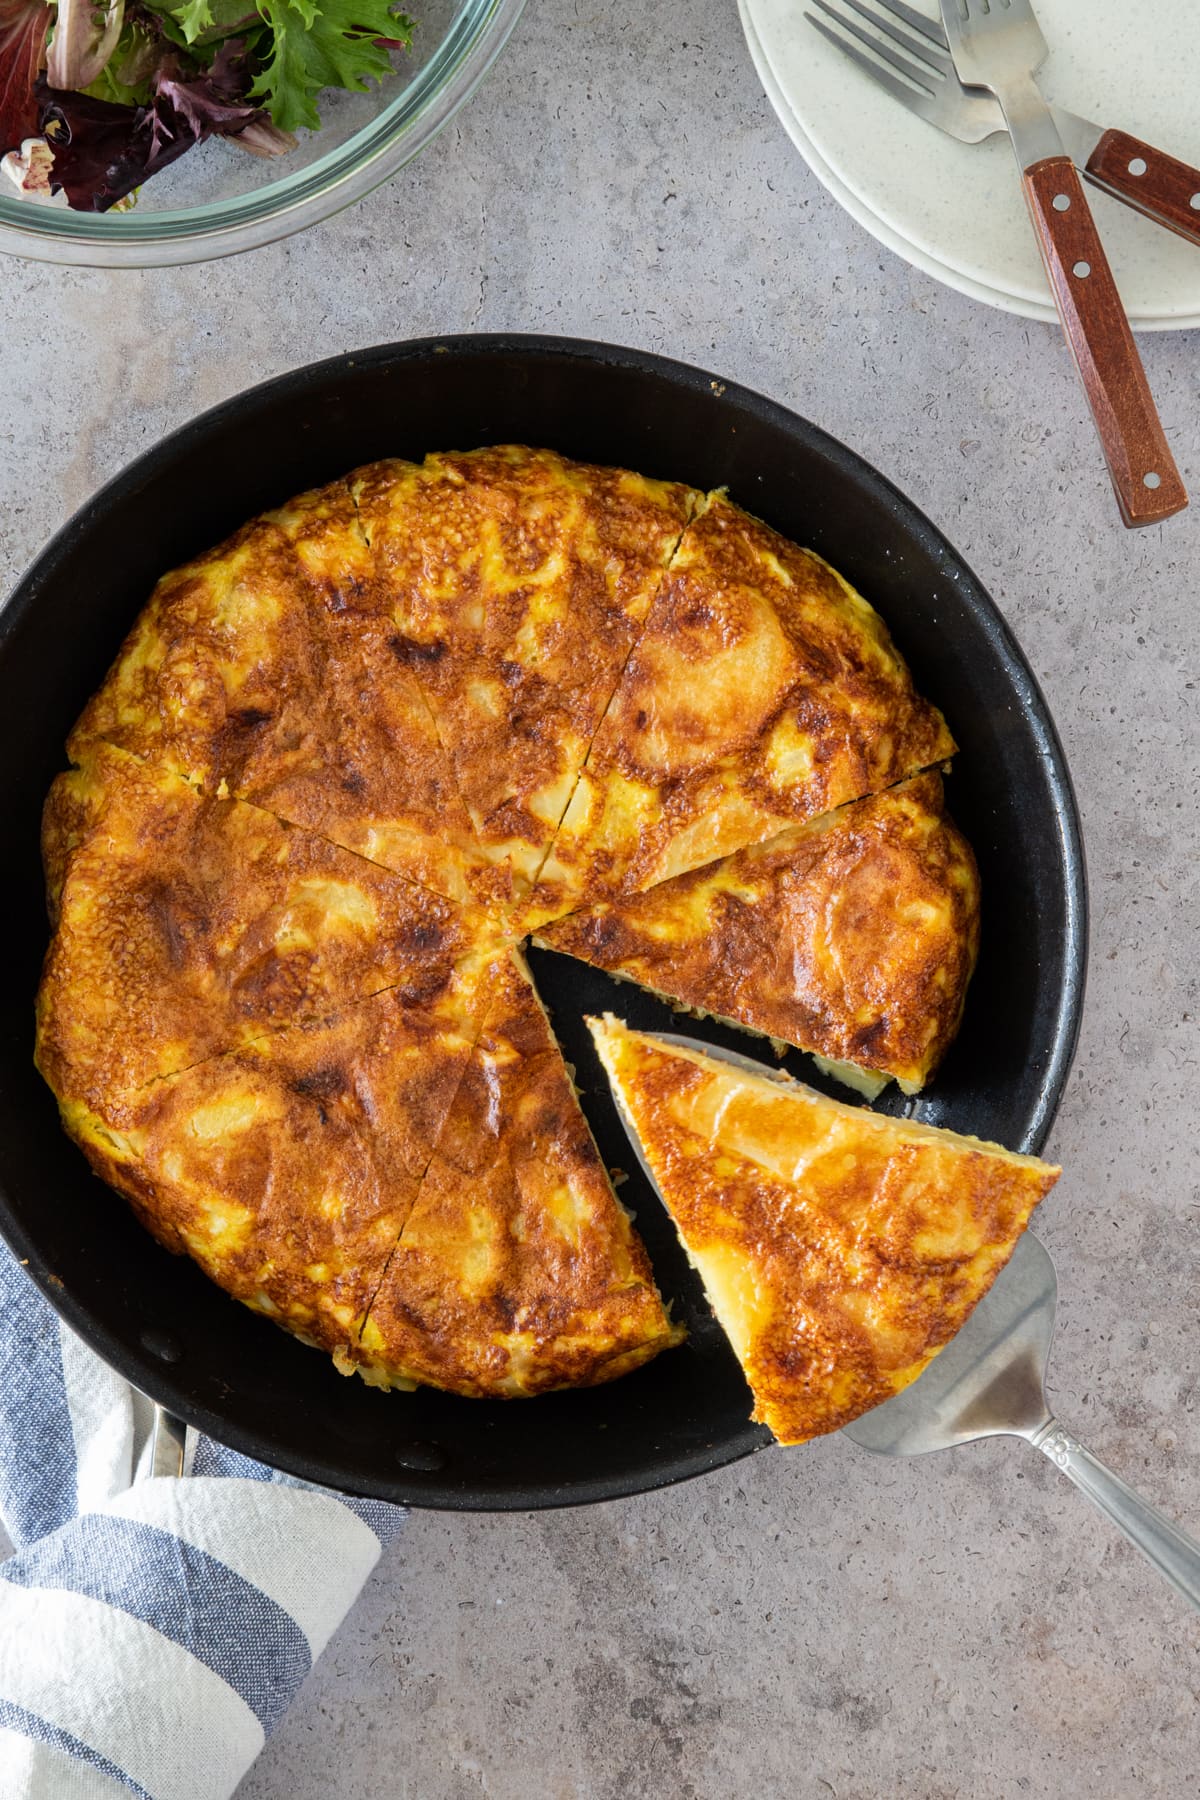 How to Make Tortilla Española (Spanish Omelette) - My Dominican Kitchen